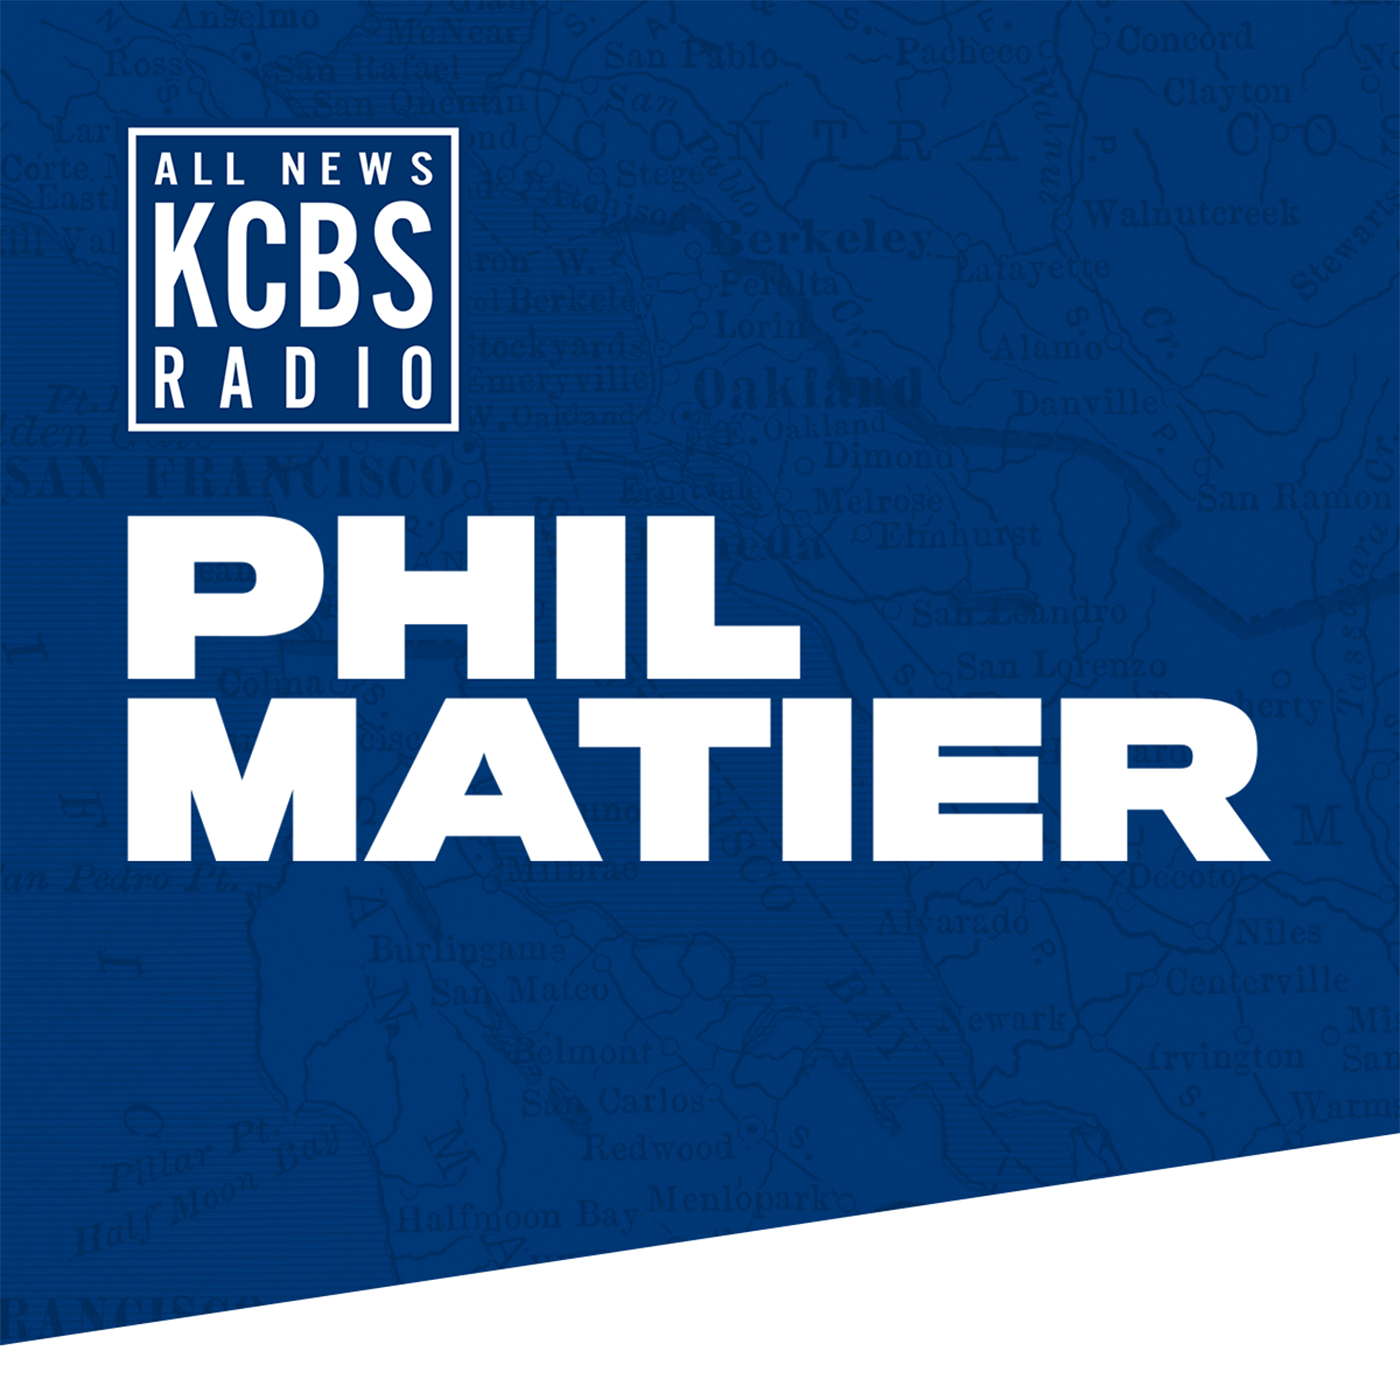 Phil Matier: Majority of Mail-In Voters Wait Until Election Day to Turn in Ballot